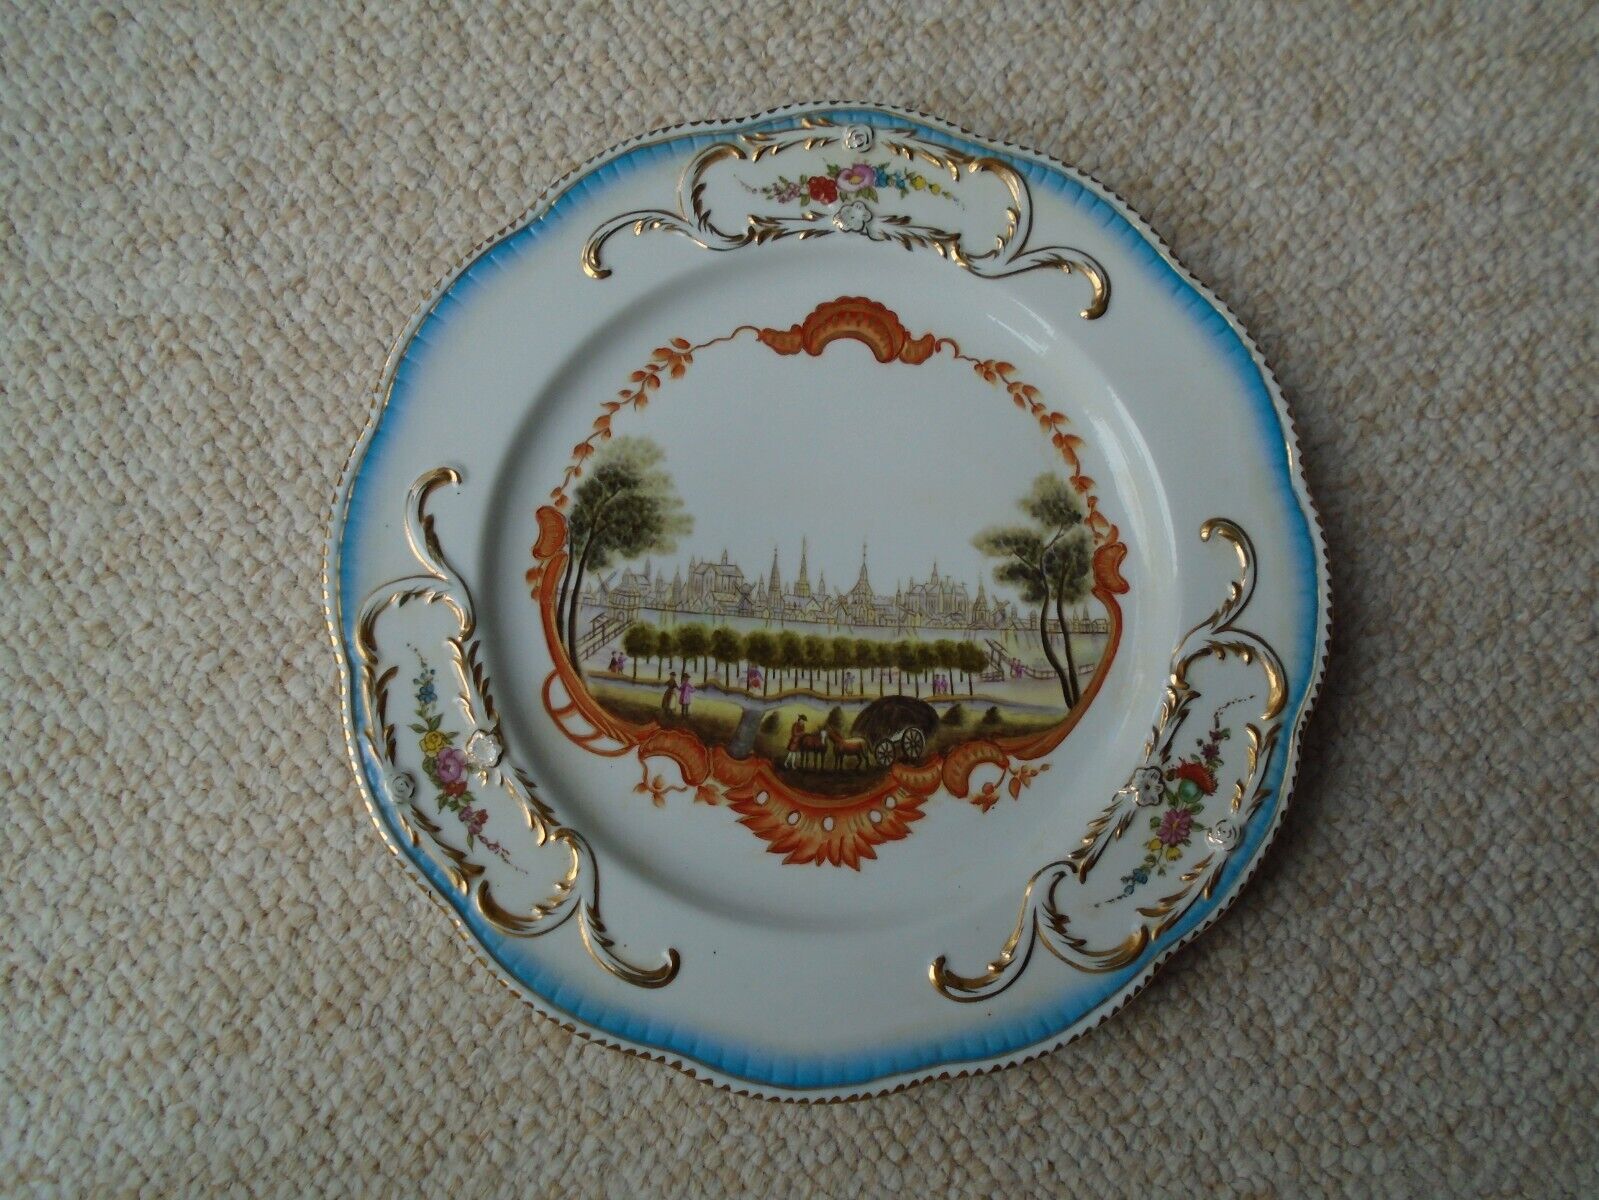 Interesting Large antique Capodimonte Porcelain plate with a city scene